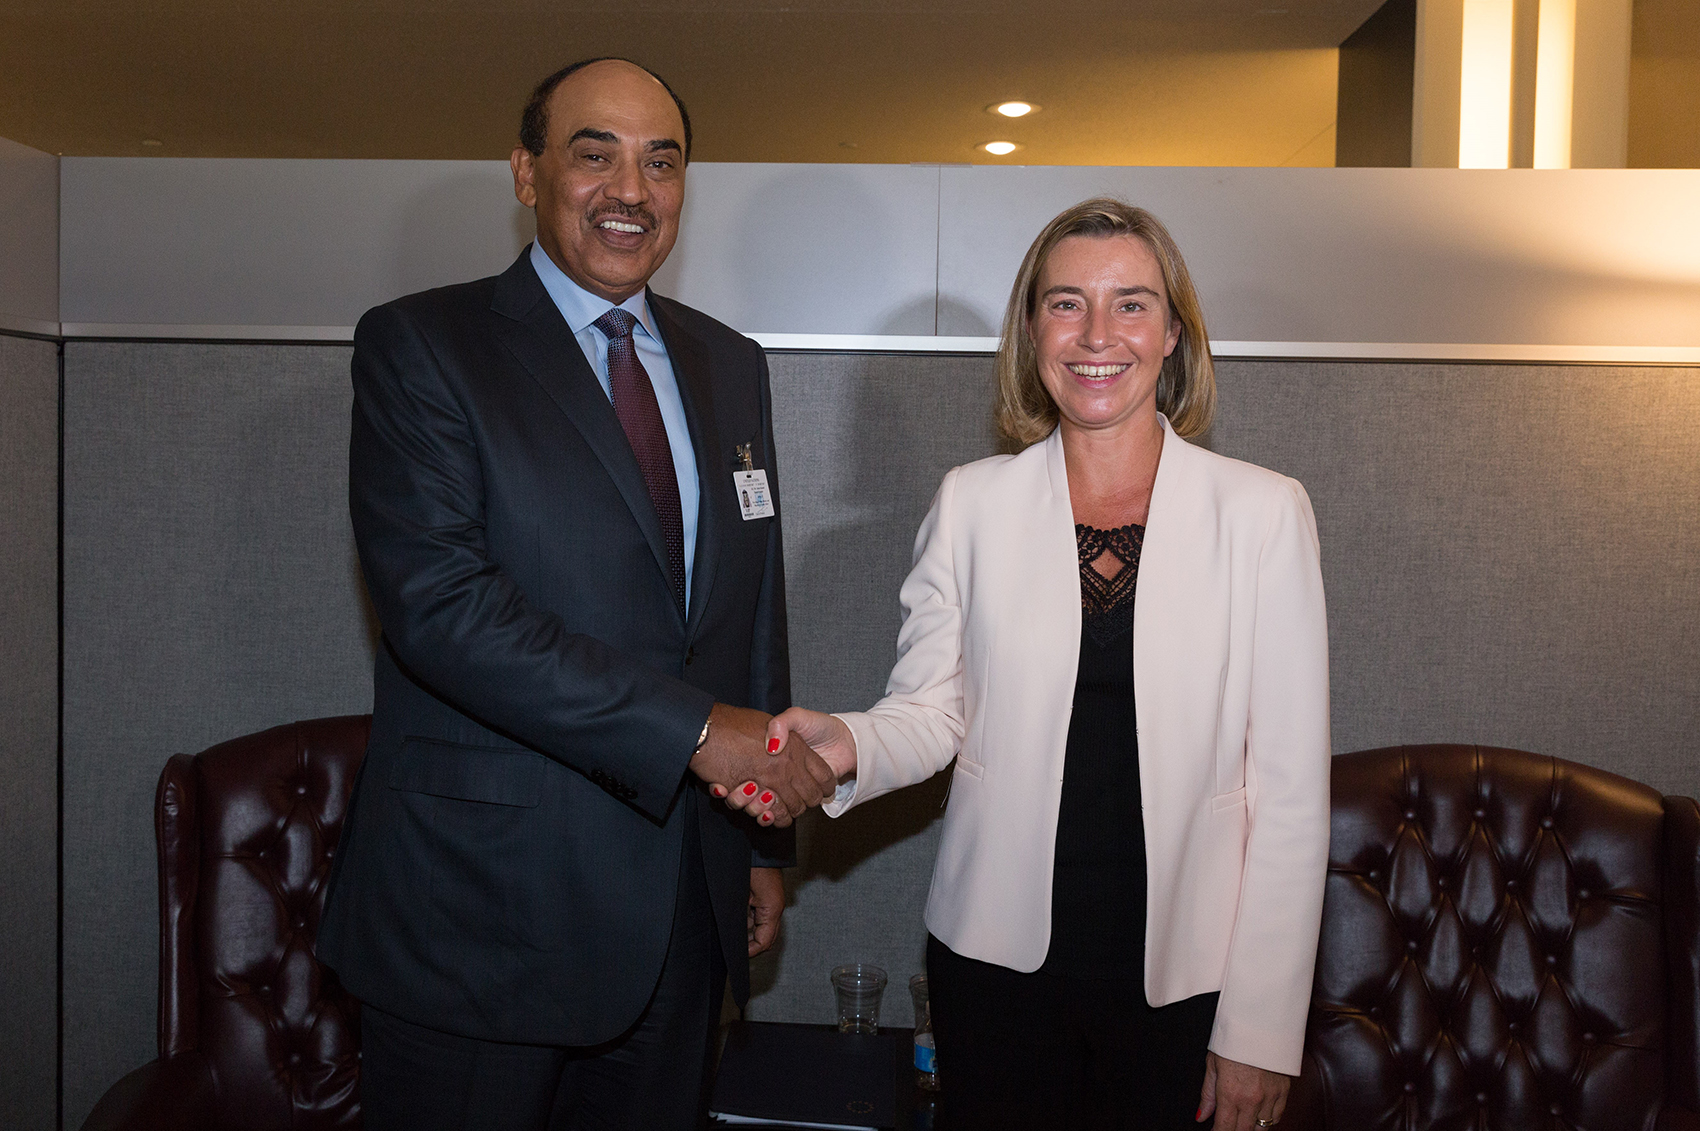 First Deputy Premier and Foreign Minister Sheikh Sabah Khaled Al-Hamad Al-Sabah meets with (EU) foreign policy chief Federica Mogherini